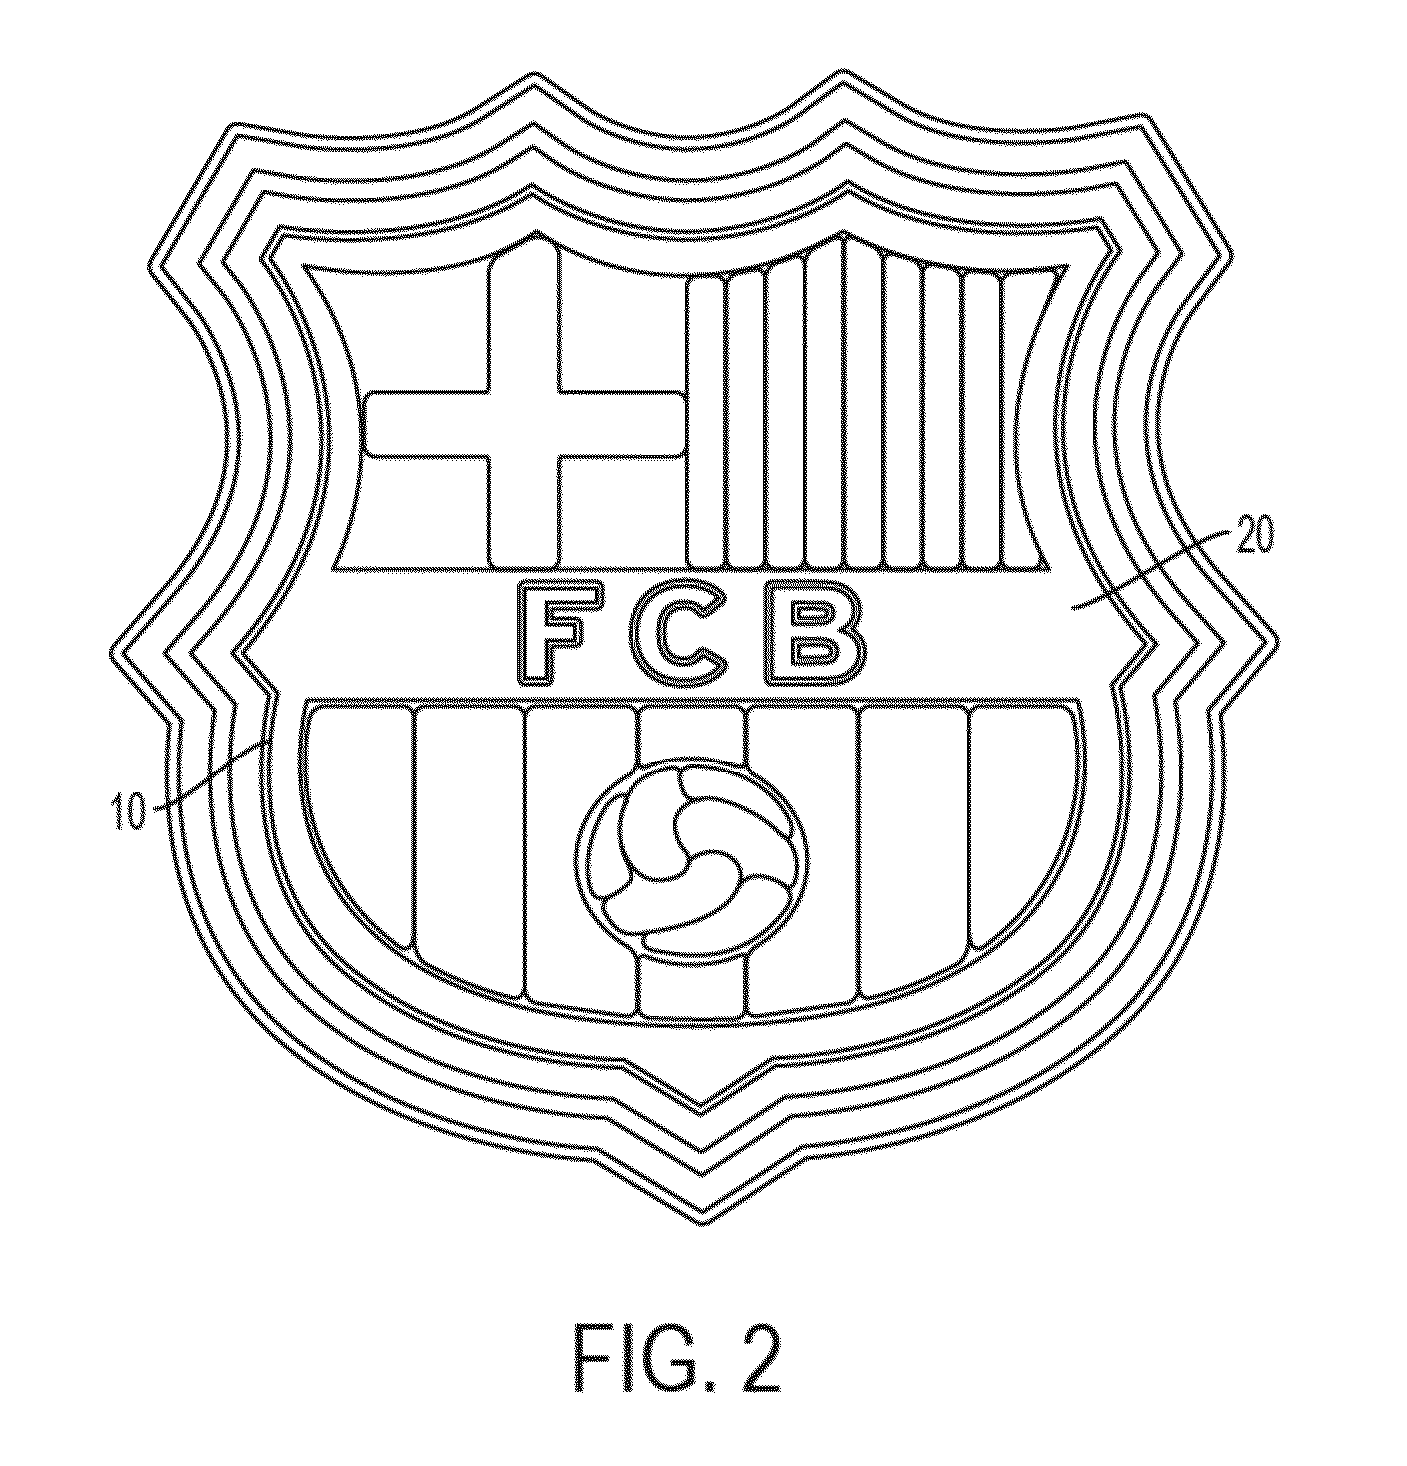 System and method for manipulating color changing materials